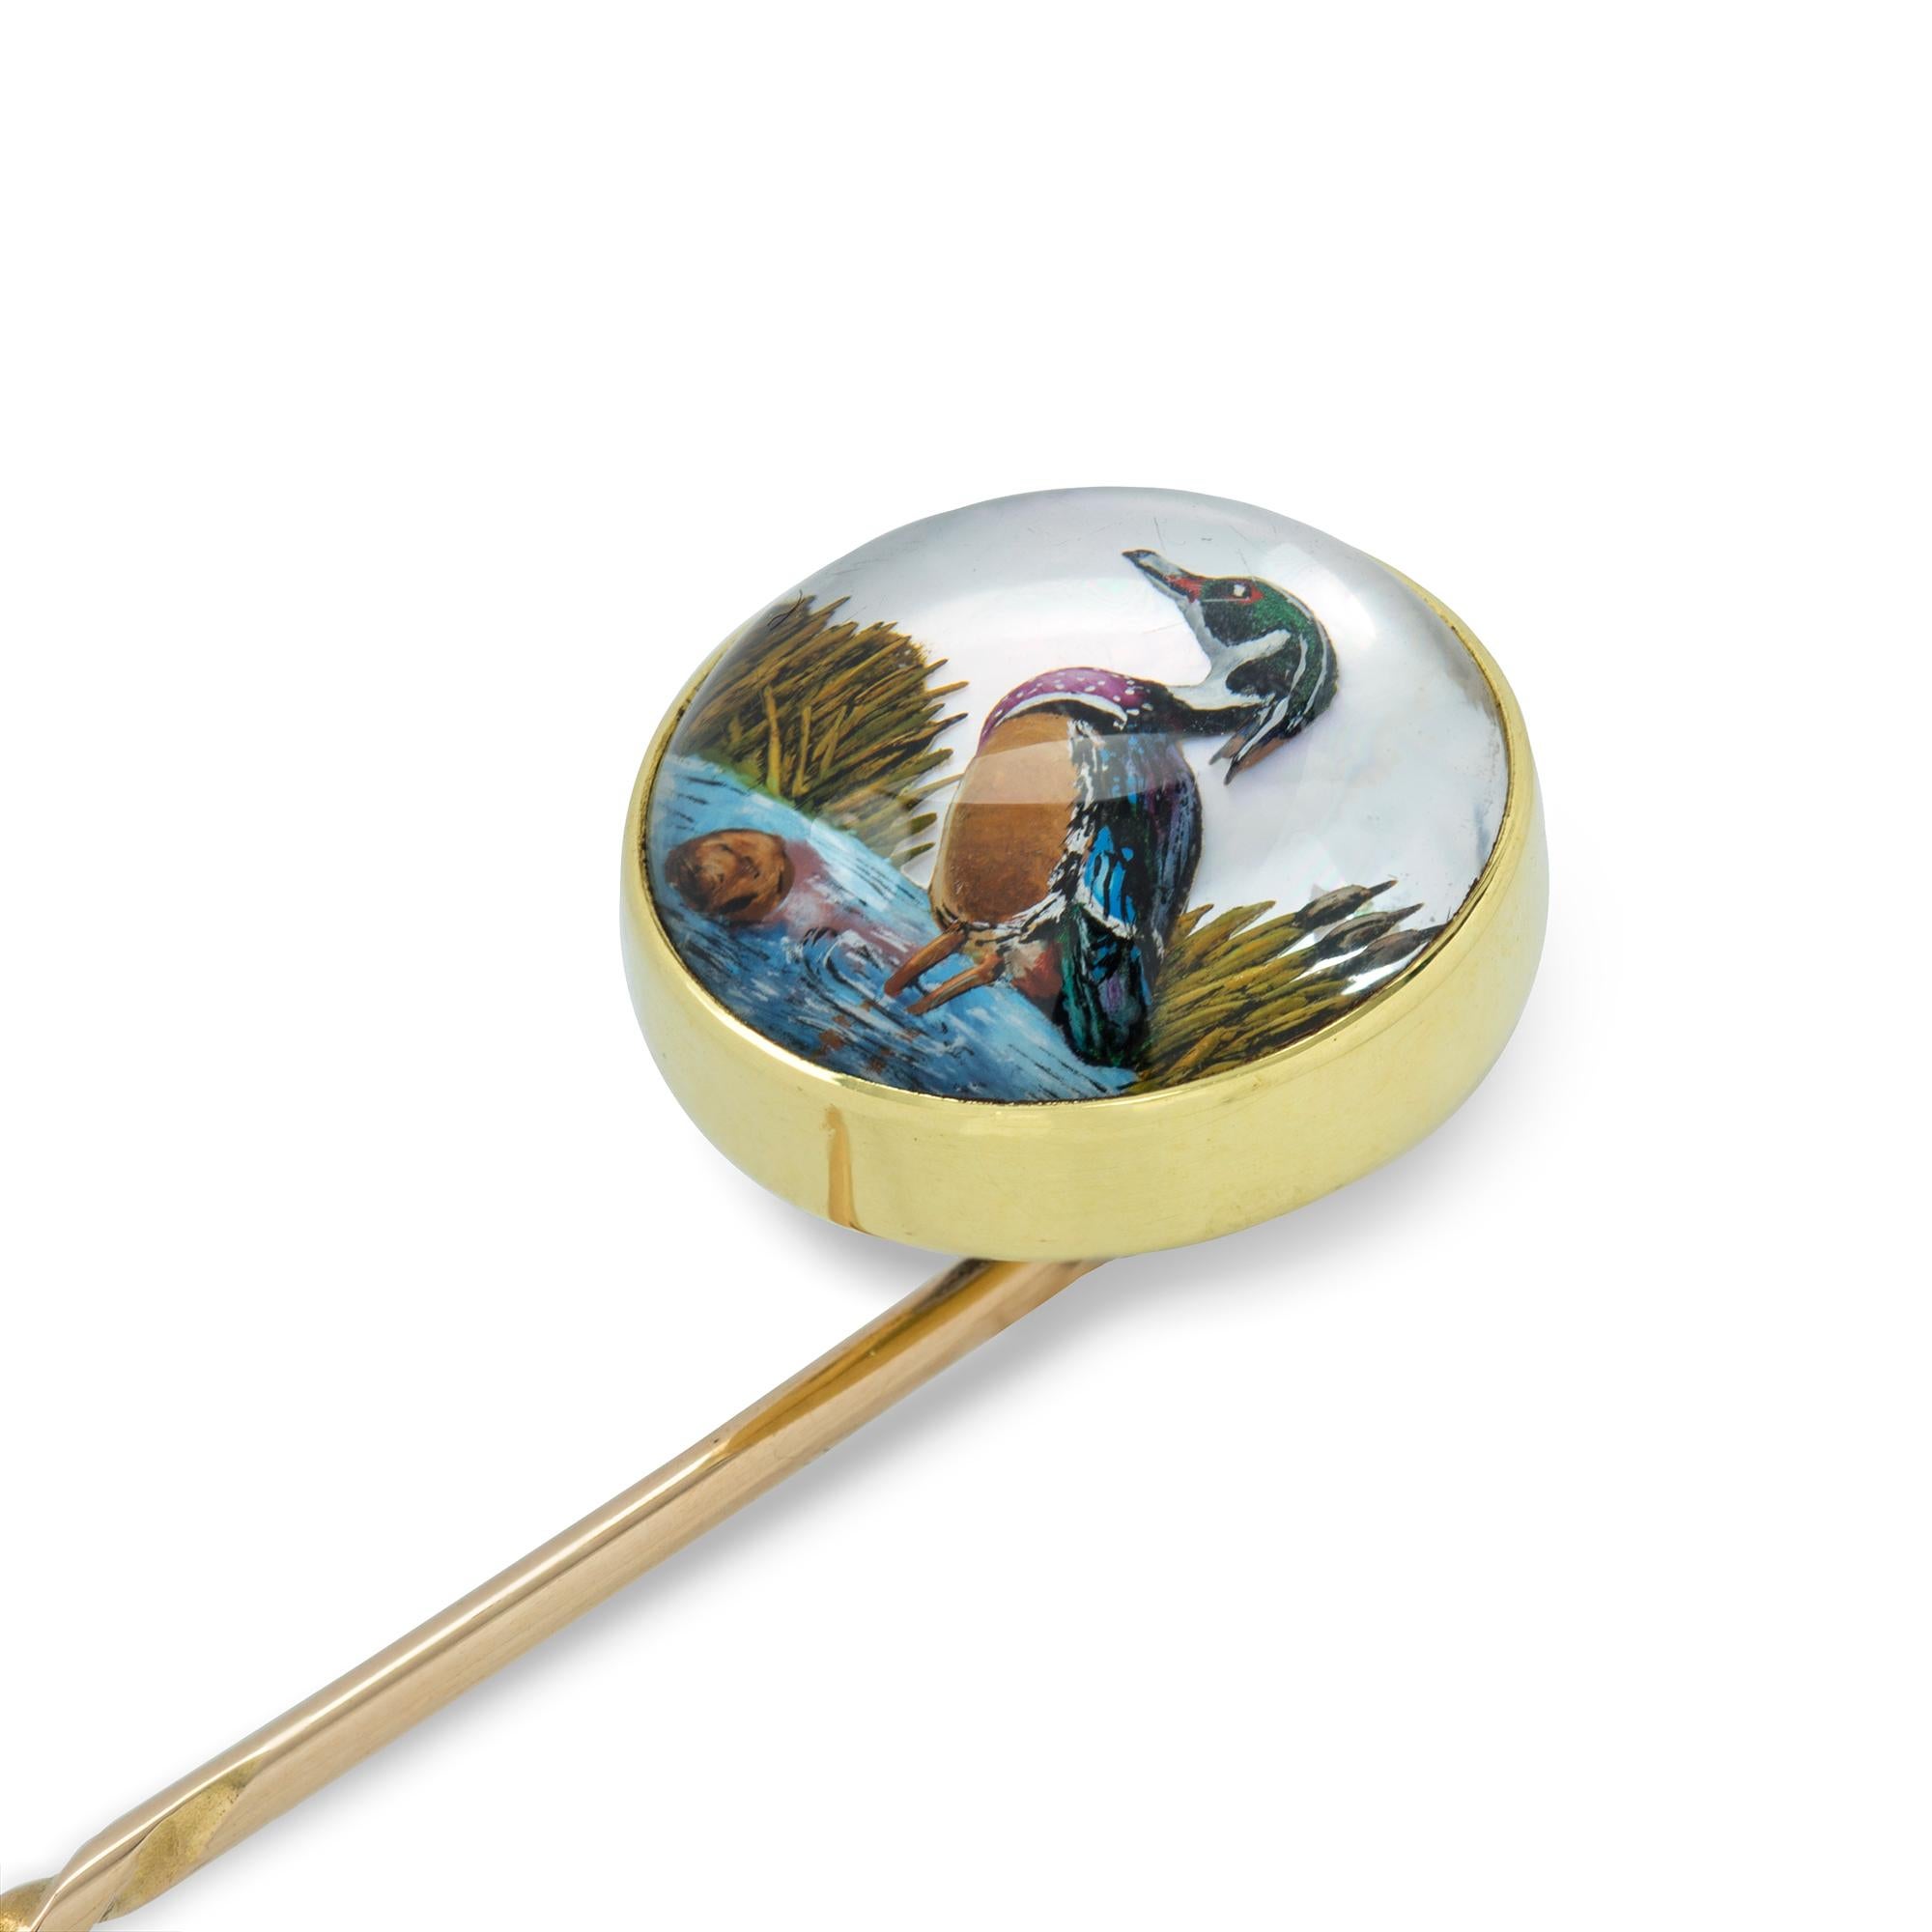 A round Essex crystal stick pin, the cabochon-cut crystal depicting a bird, set on an 18ct gold rub-over mount, to gold pin fitting, circa 1900, the jewelled part measuring 1.4cm in diameter, the pin measuring 6.8cm, gross weight 5 grams.

This